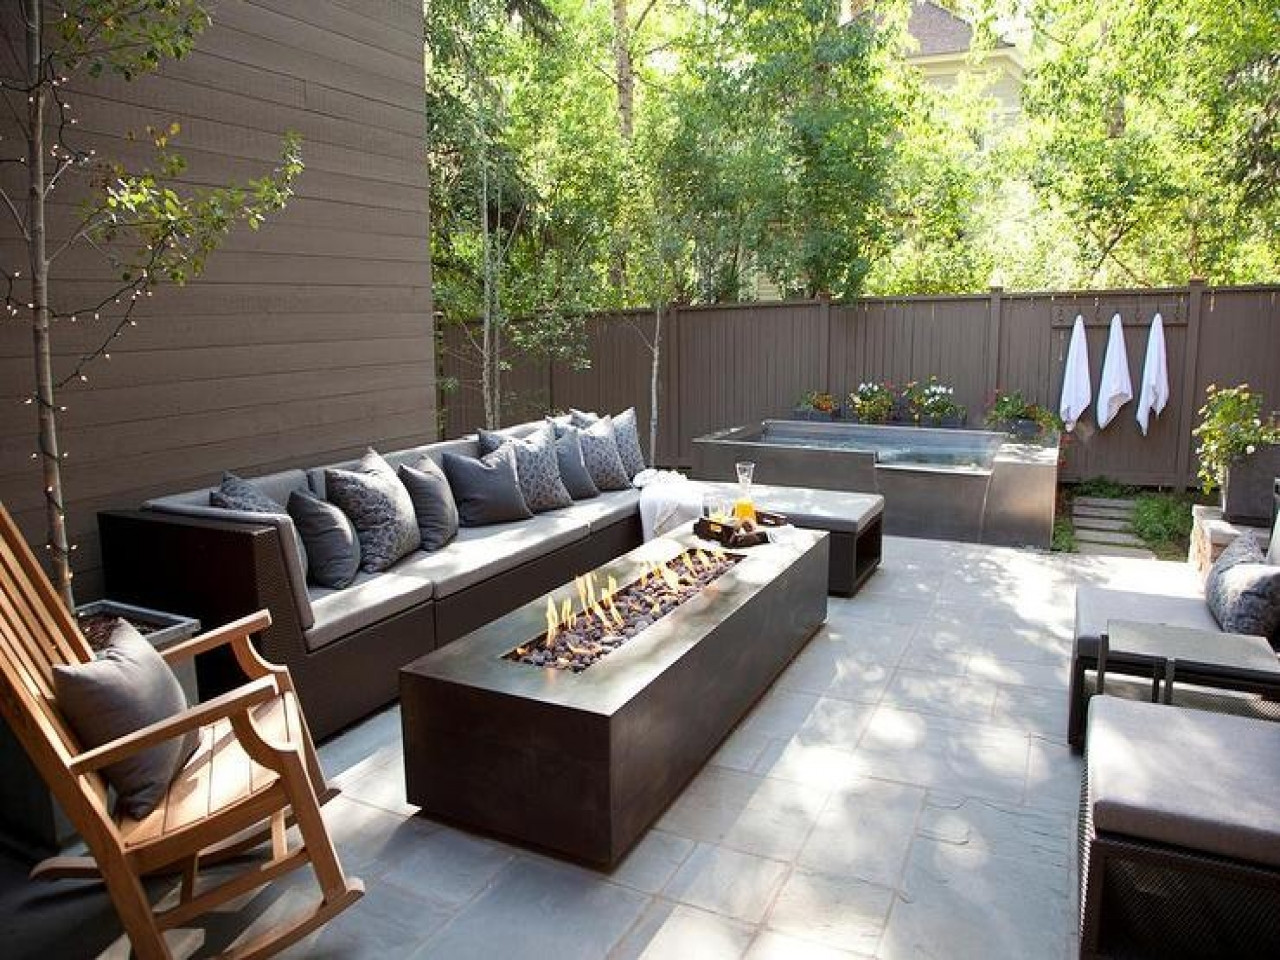 Outdoor Sectional With Firepit
 Modern Outdoor Sofa With Chaise Lounge Facing A Long Fire